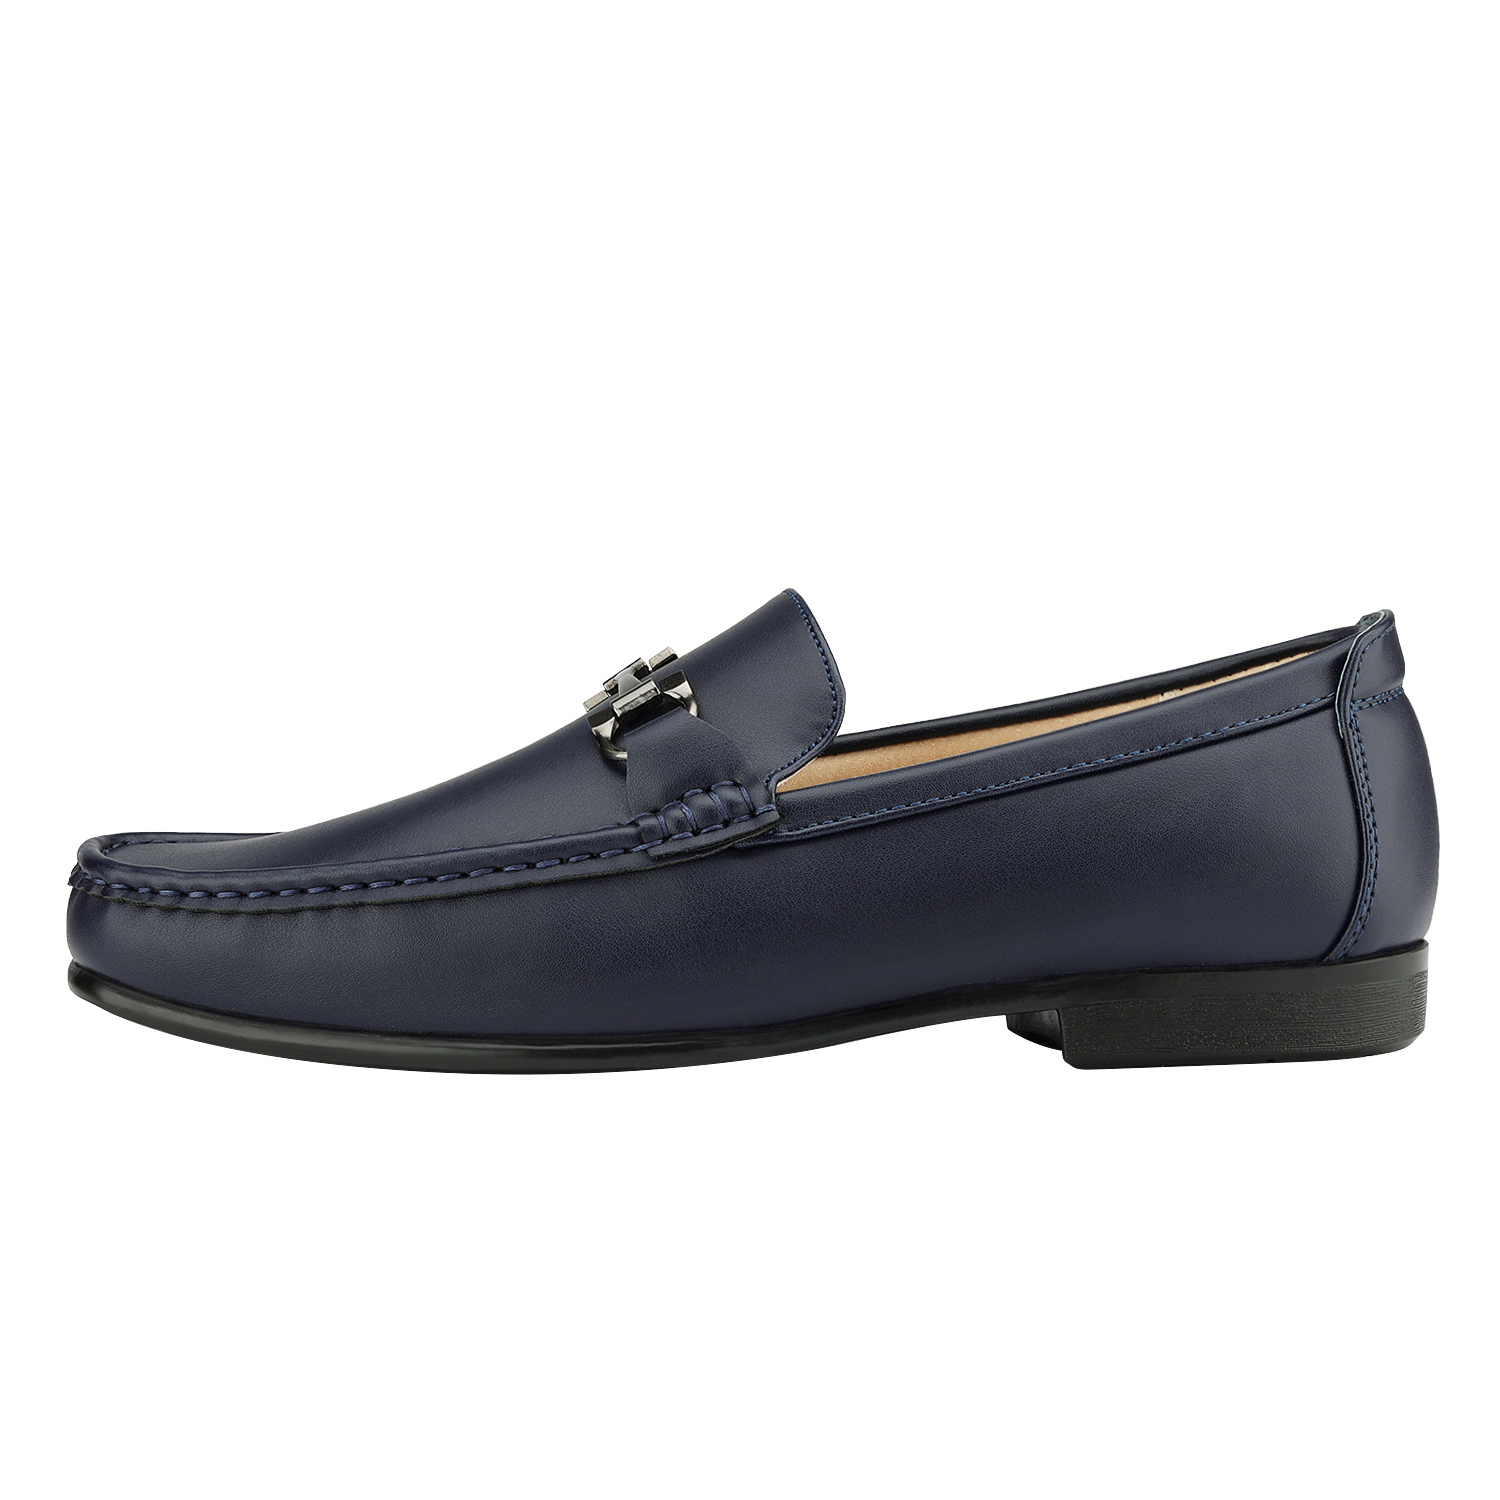 Bruno Marc Men's Moccasin Loafer Shoes Men Dress Loafers Slip On Casual Penny Comfort Outdoor Loafers HENRY-1 NAVY Size 7.5 - image 4 of 5